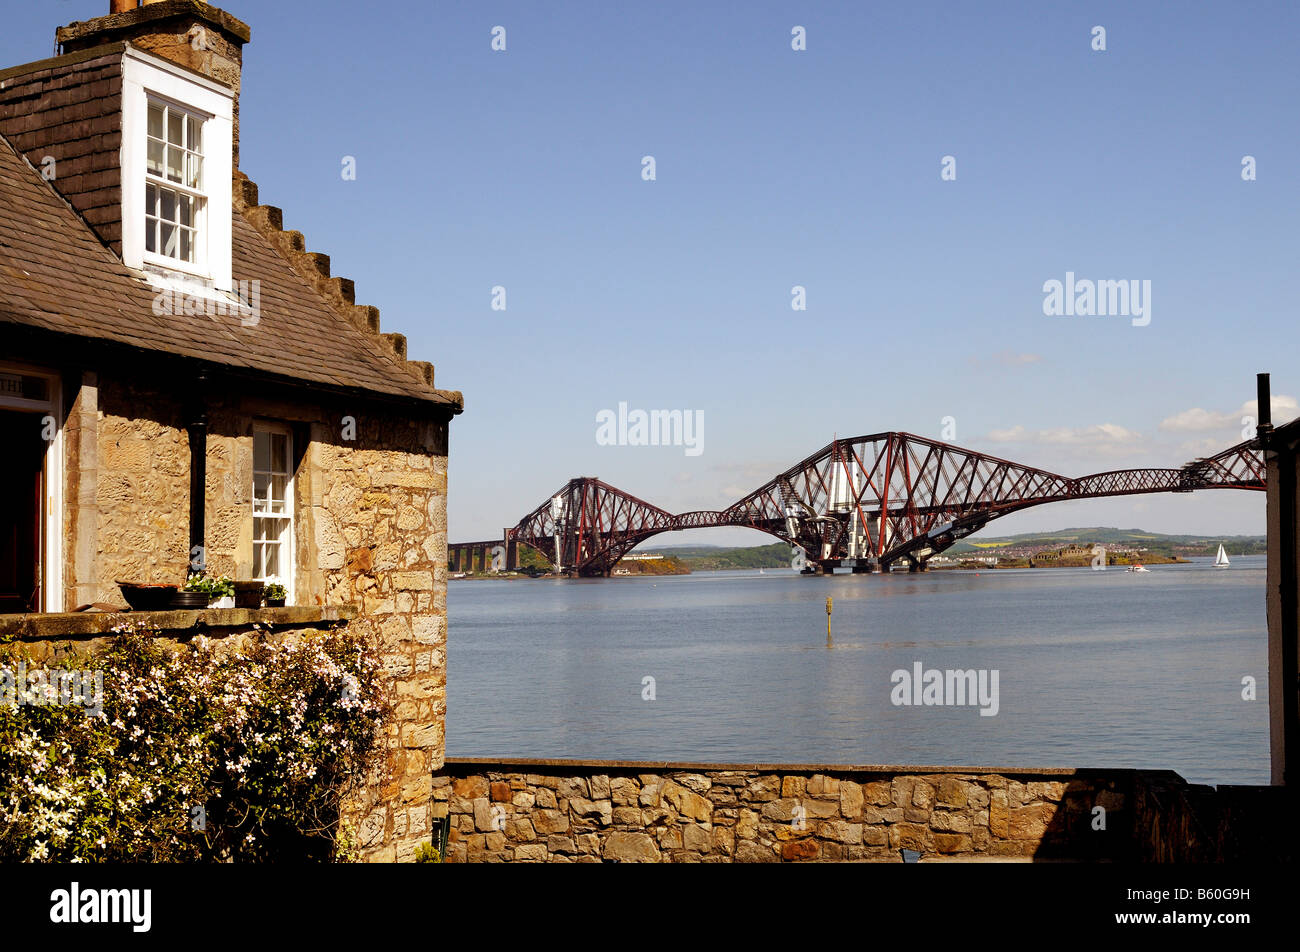 House in front of Forth Rail Bridge, crossing the firth of Forth Fjord near Edinburgh, Scotland, Great Britain, Europe Stock Photo